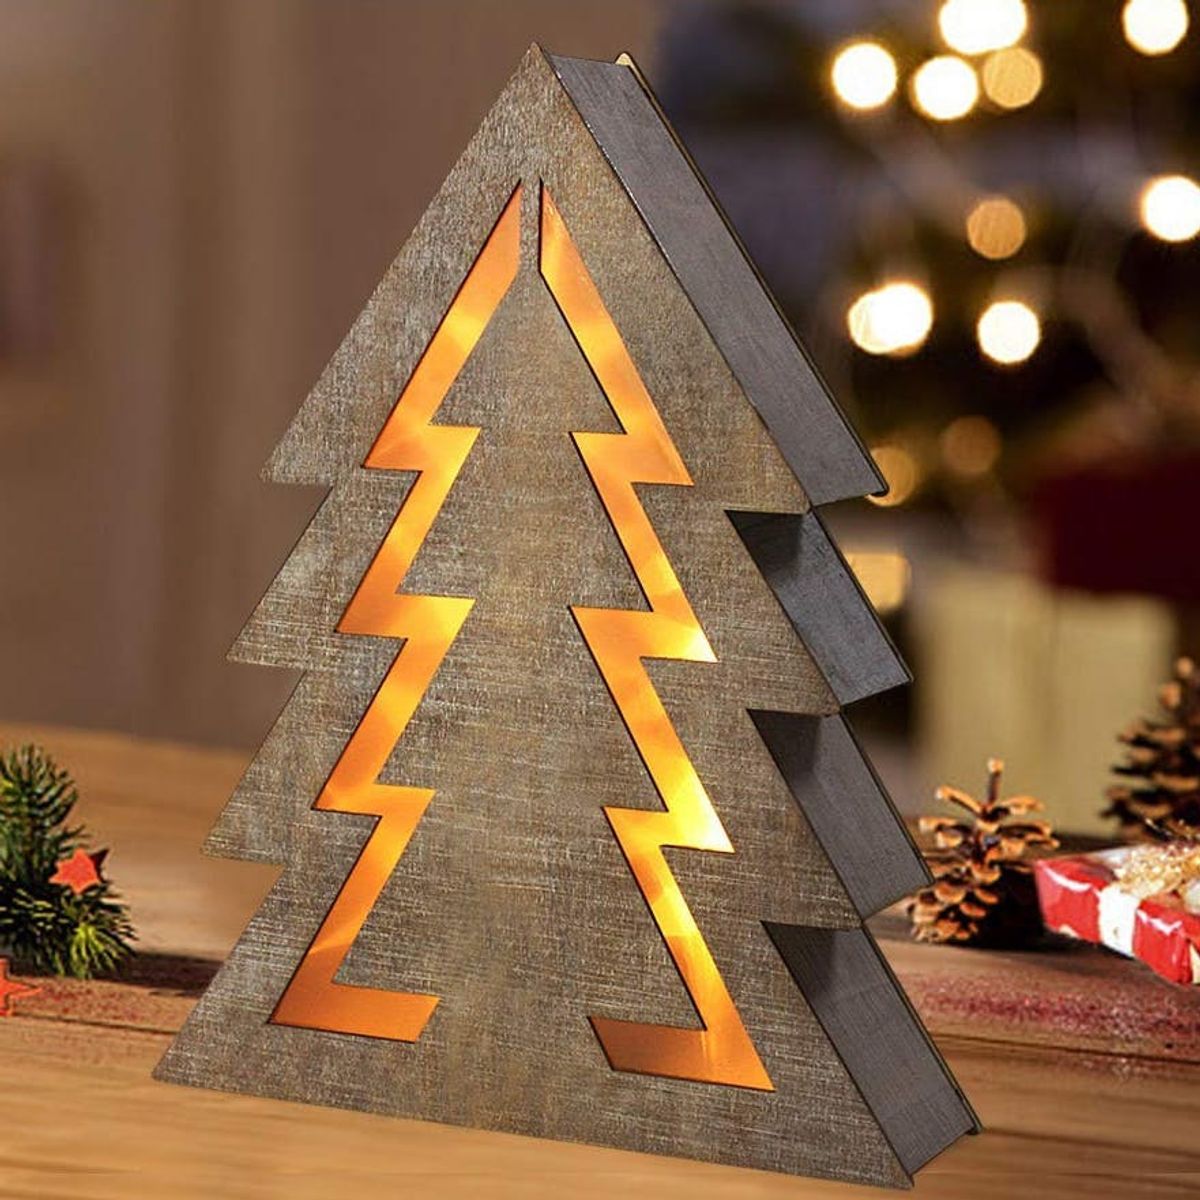 The Best Holiday Decor You Can Amazon Prime for Under $50